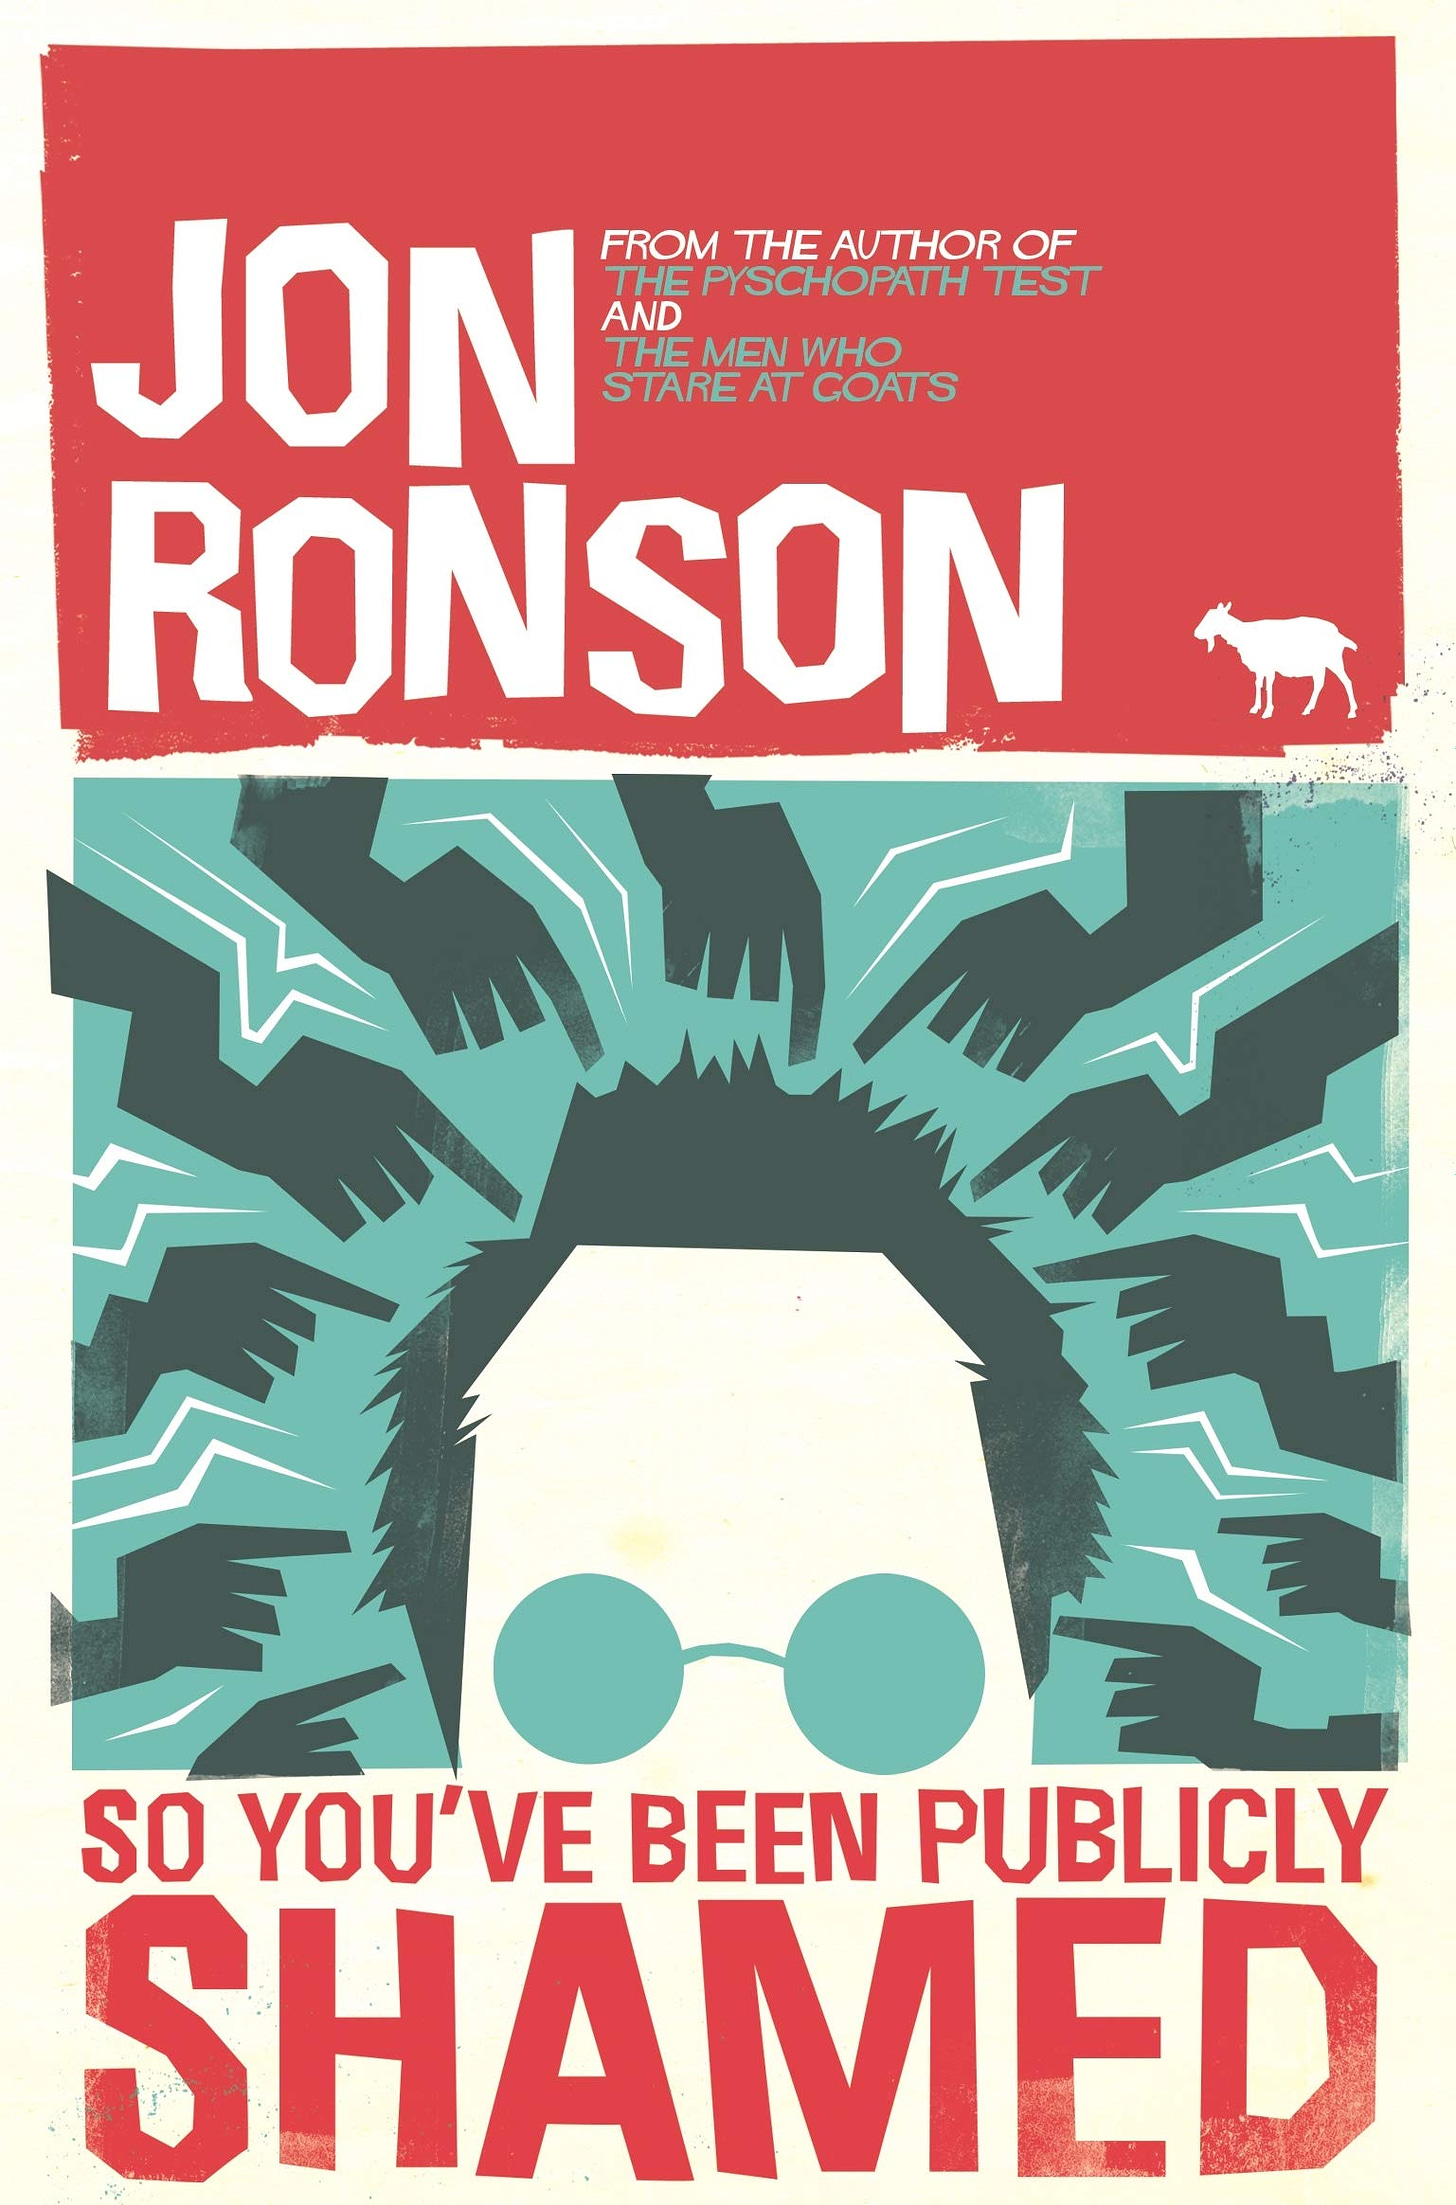 So Youve Been Publicly Shamed: Jon Ronson: 0000330492292: Amazon.com: Books